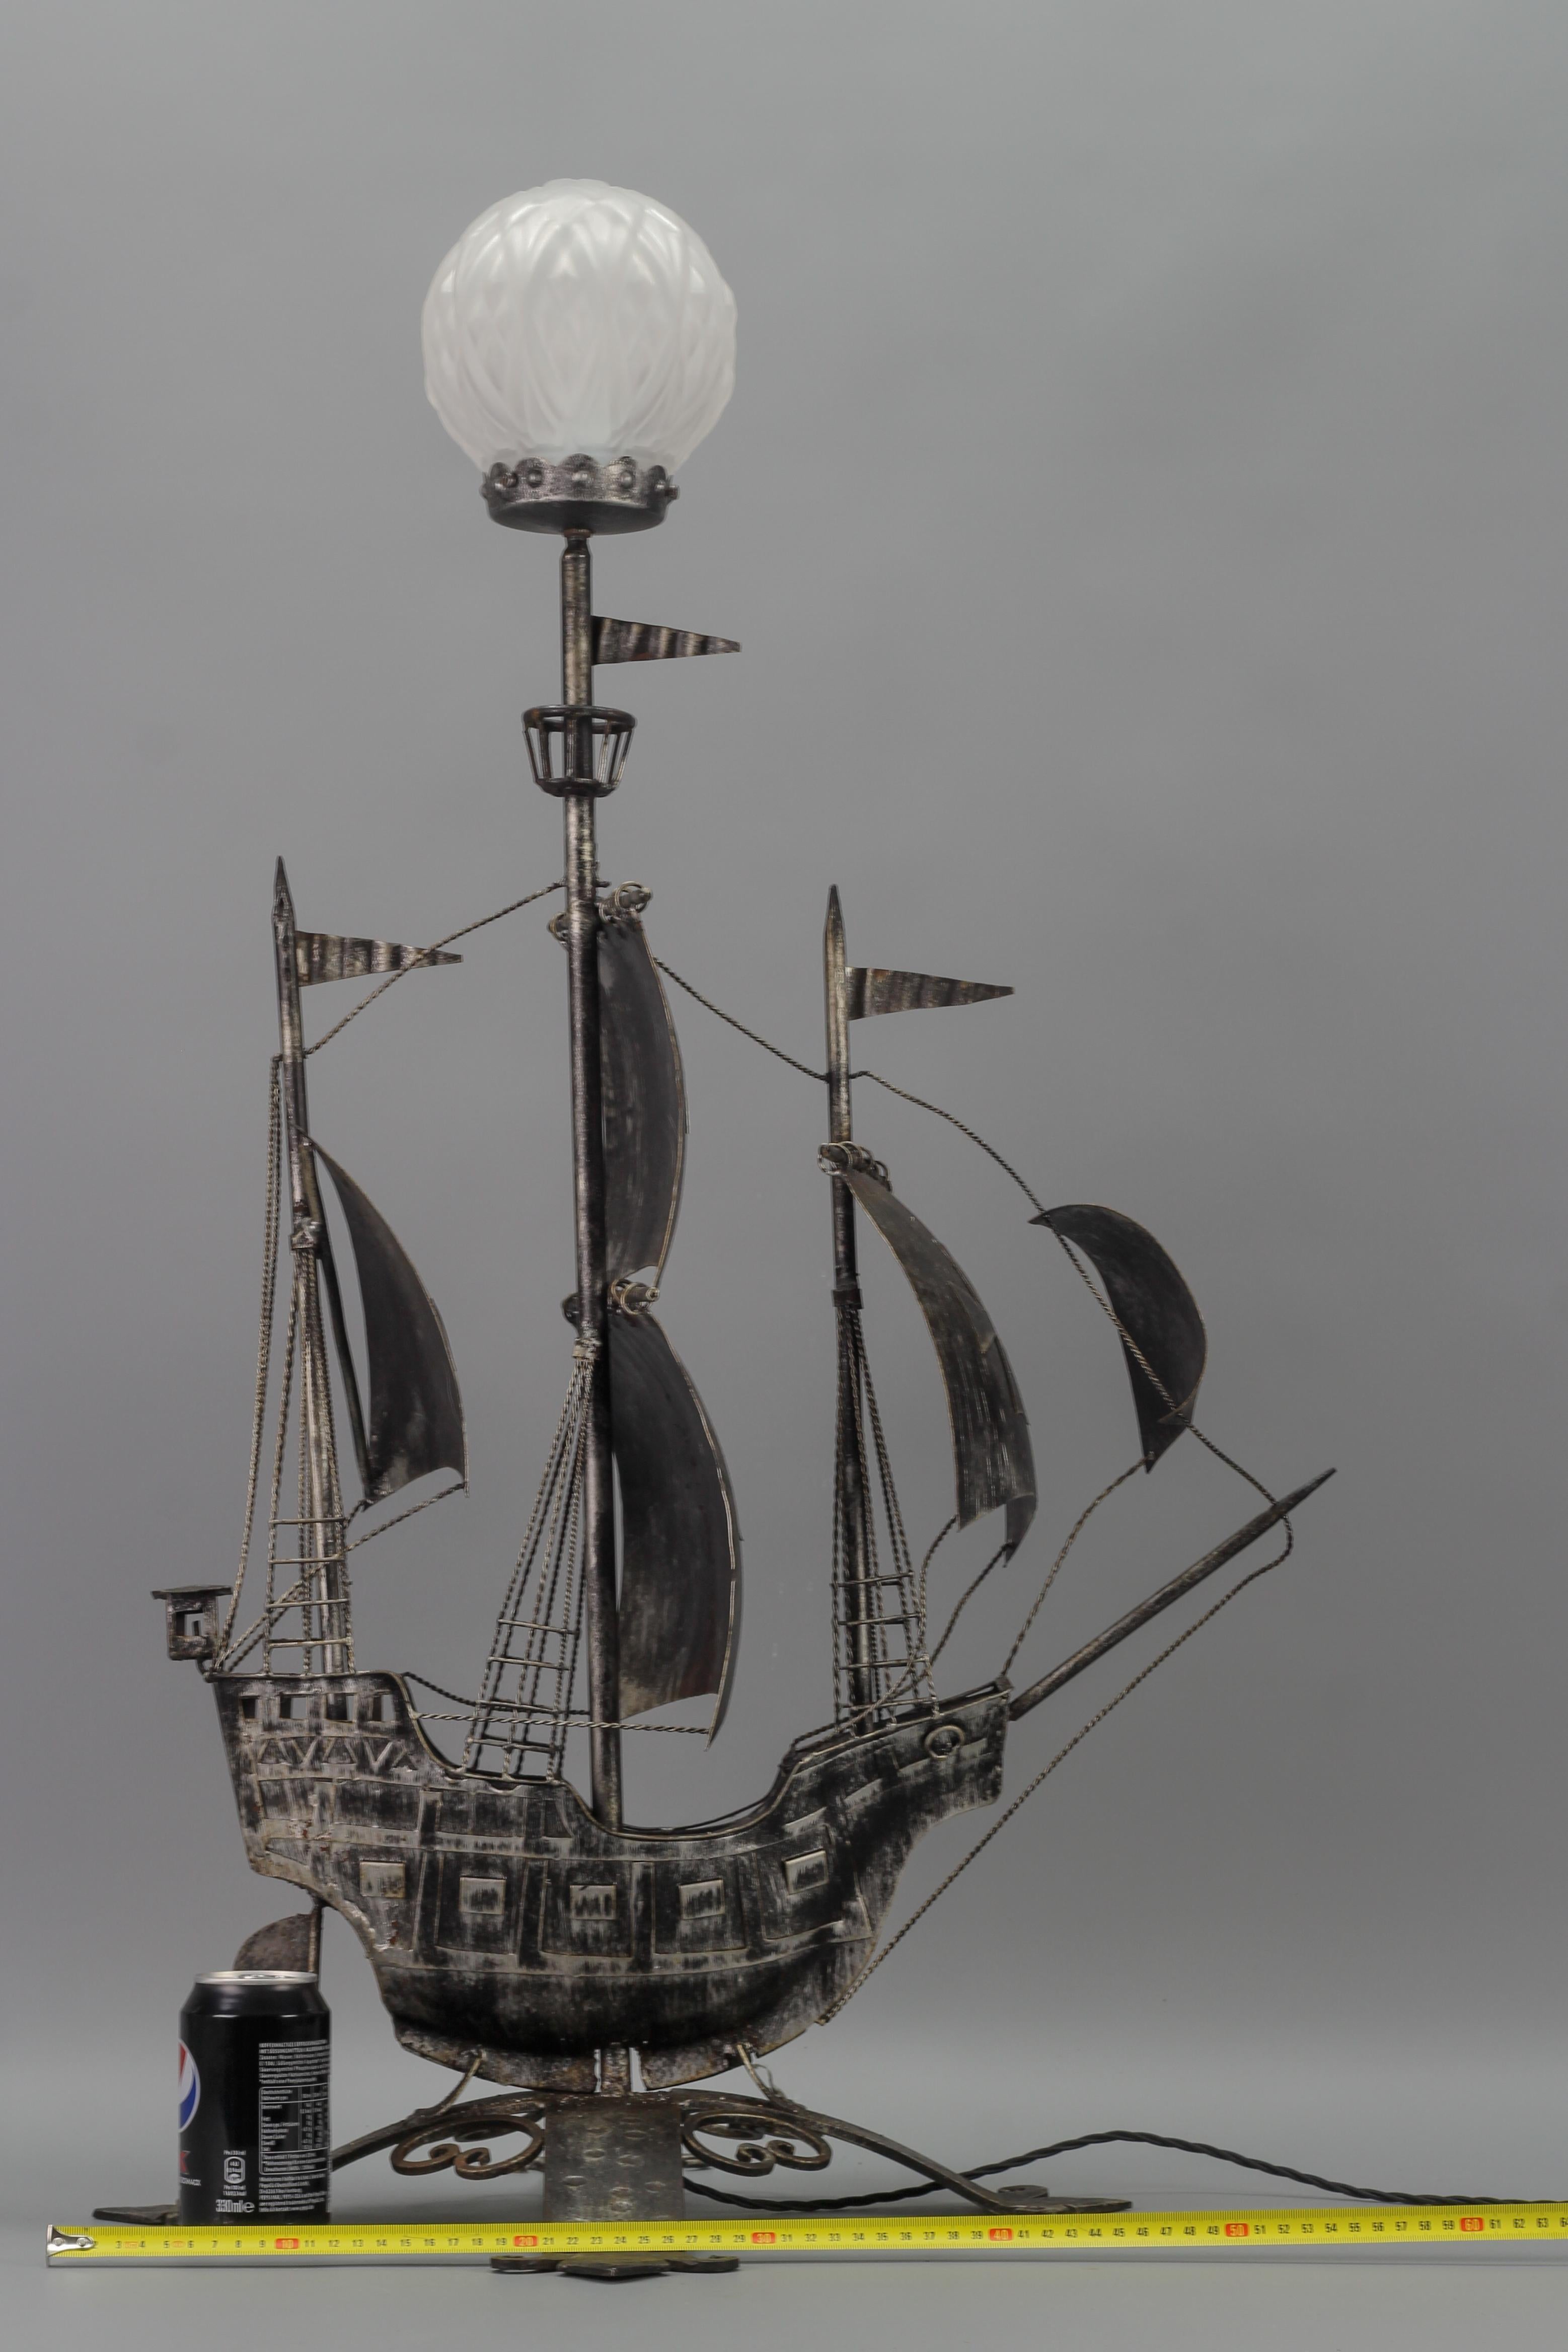 Mid-20th Century Wrought Iron and Glass Spanish Galleon Sailing Ship Shaped Floor Lamp, 1950s For Sale